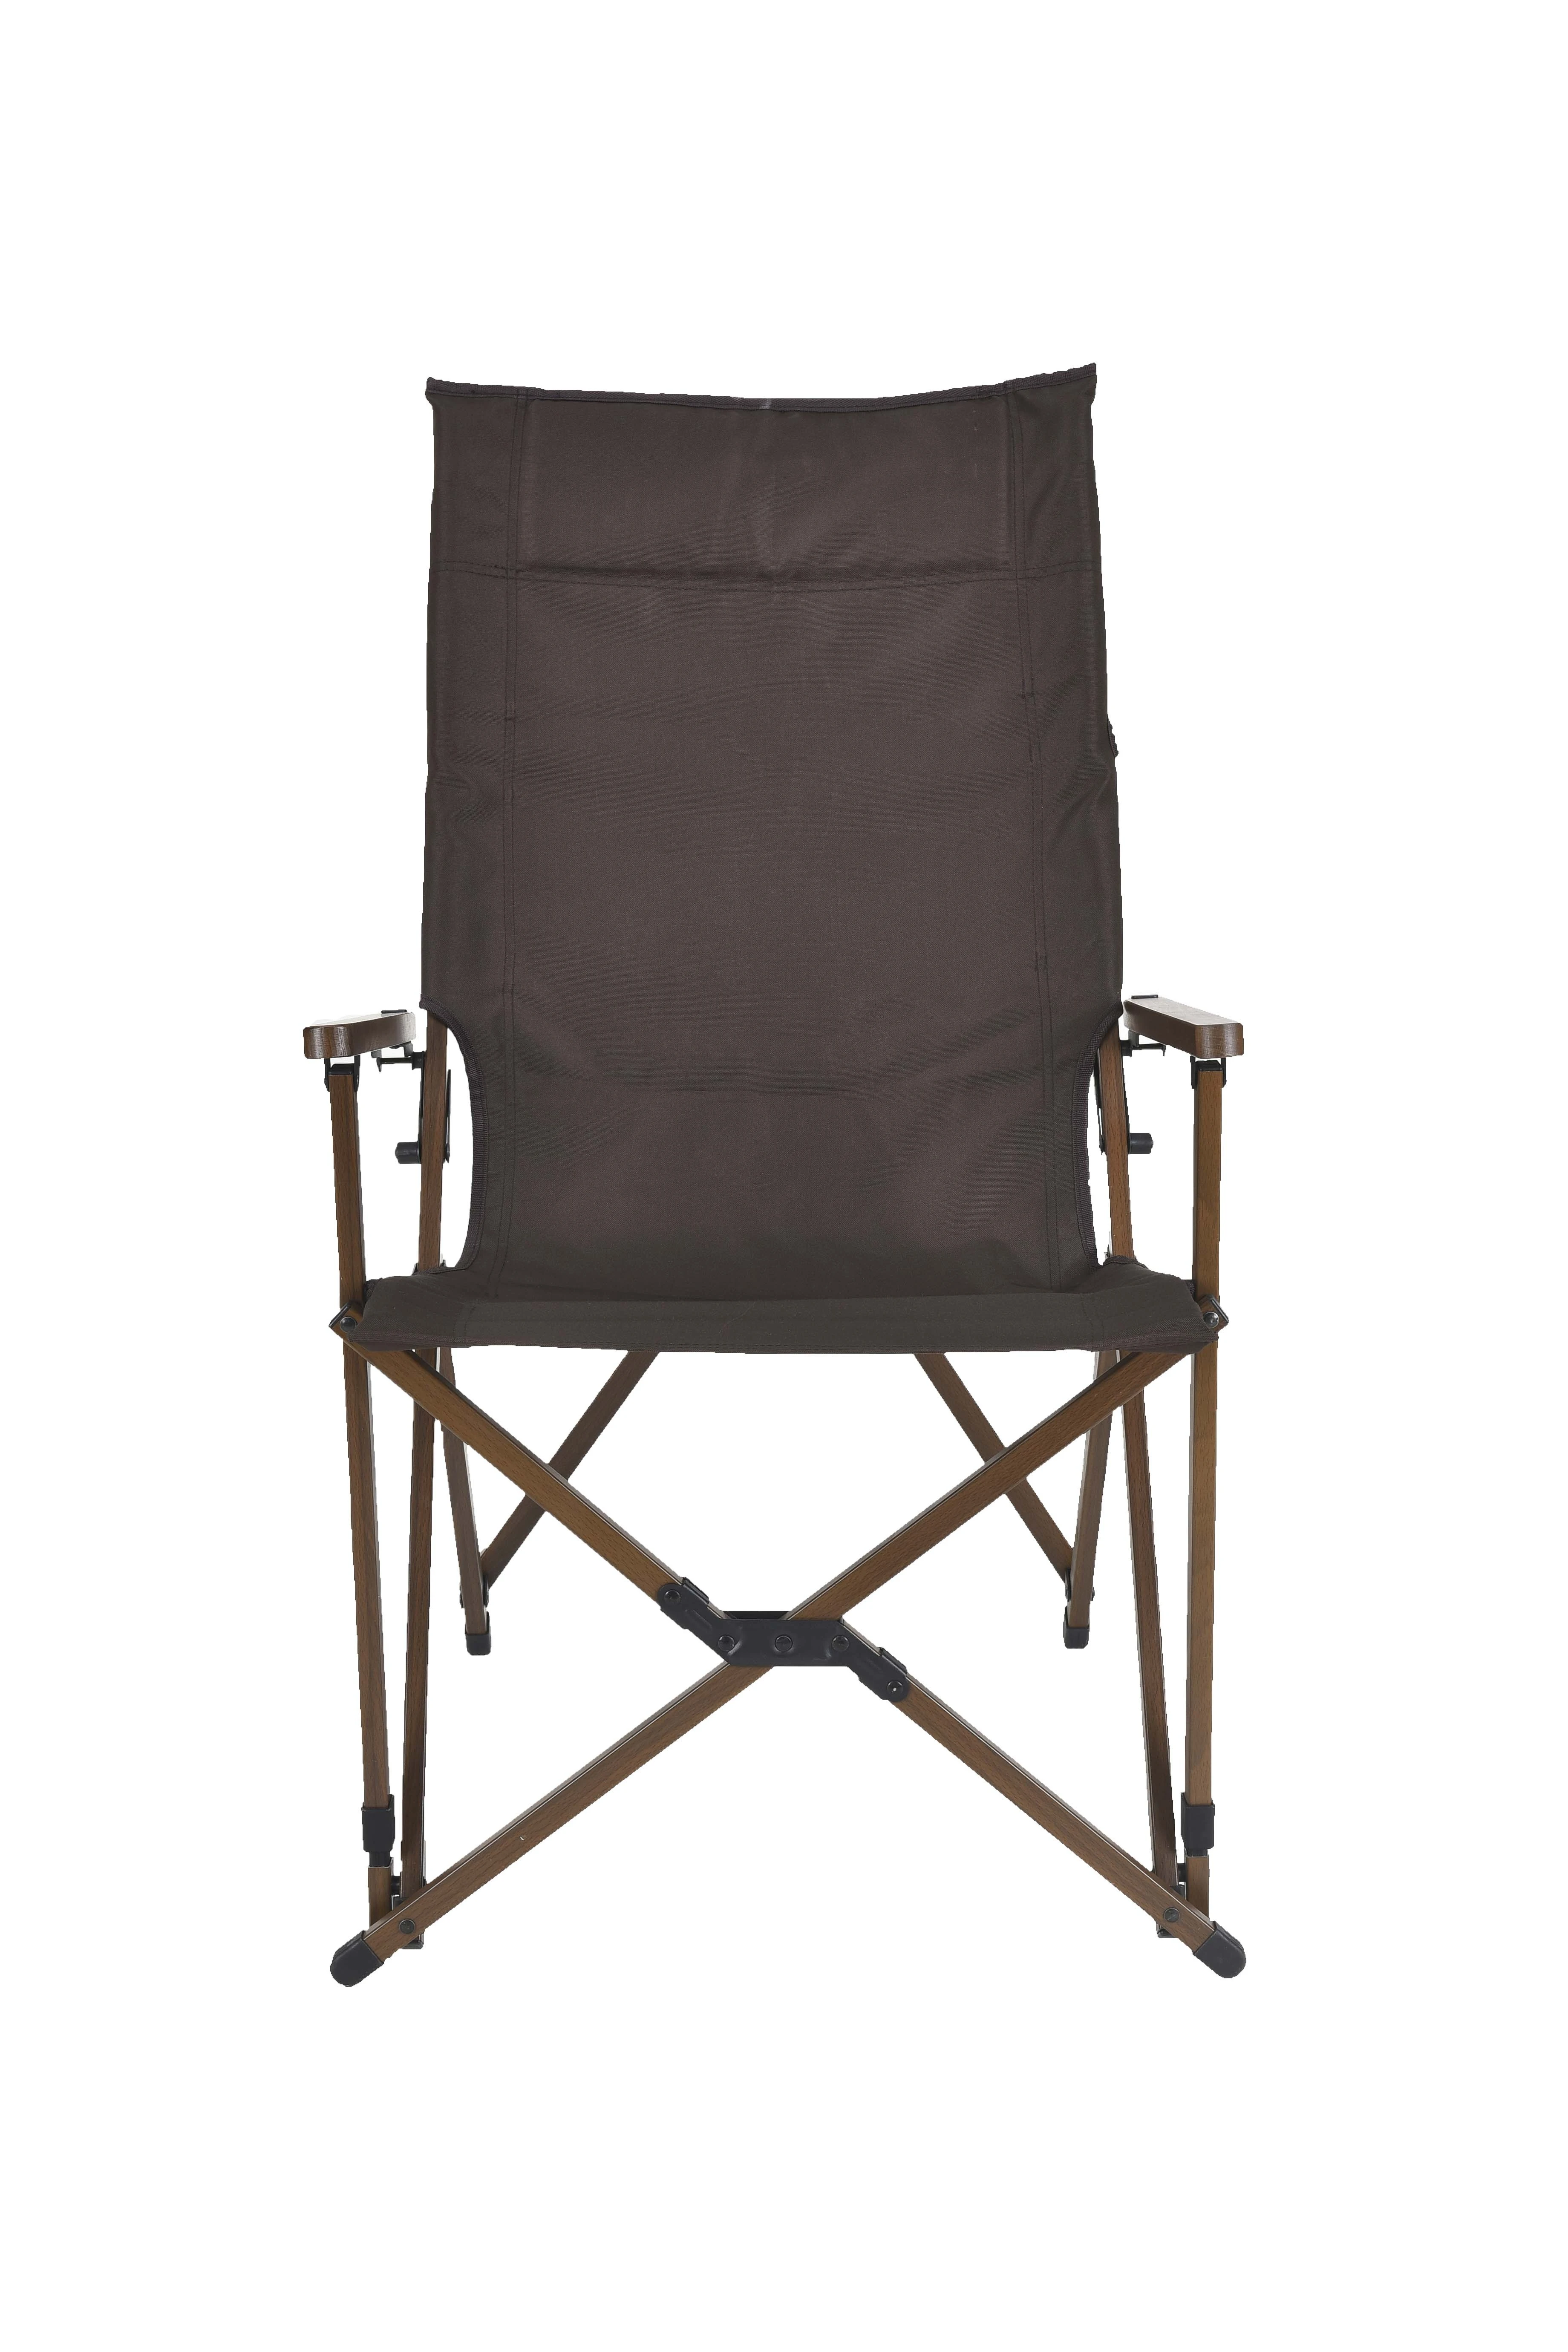 Heavy duty Korea recliner camp fishing outdoor camping chair foldable